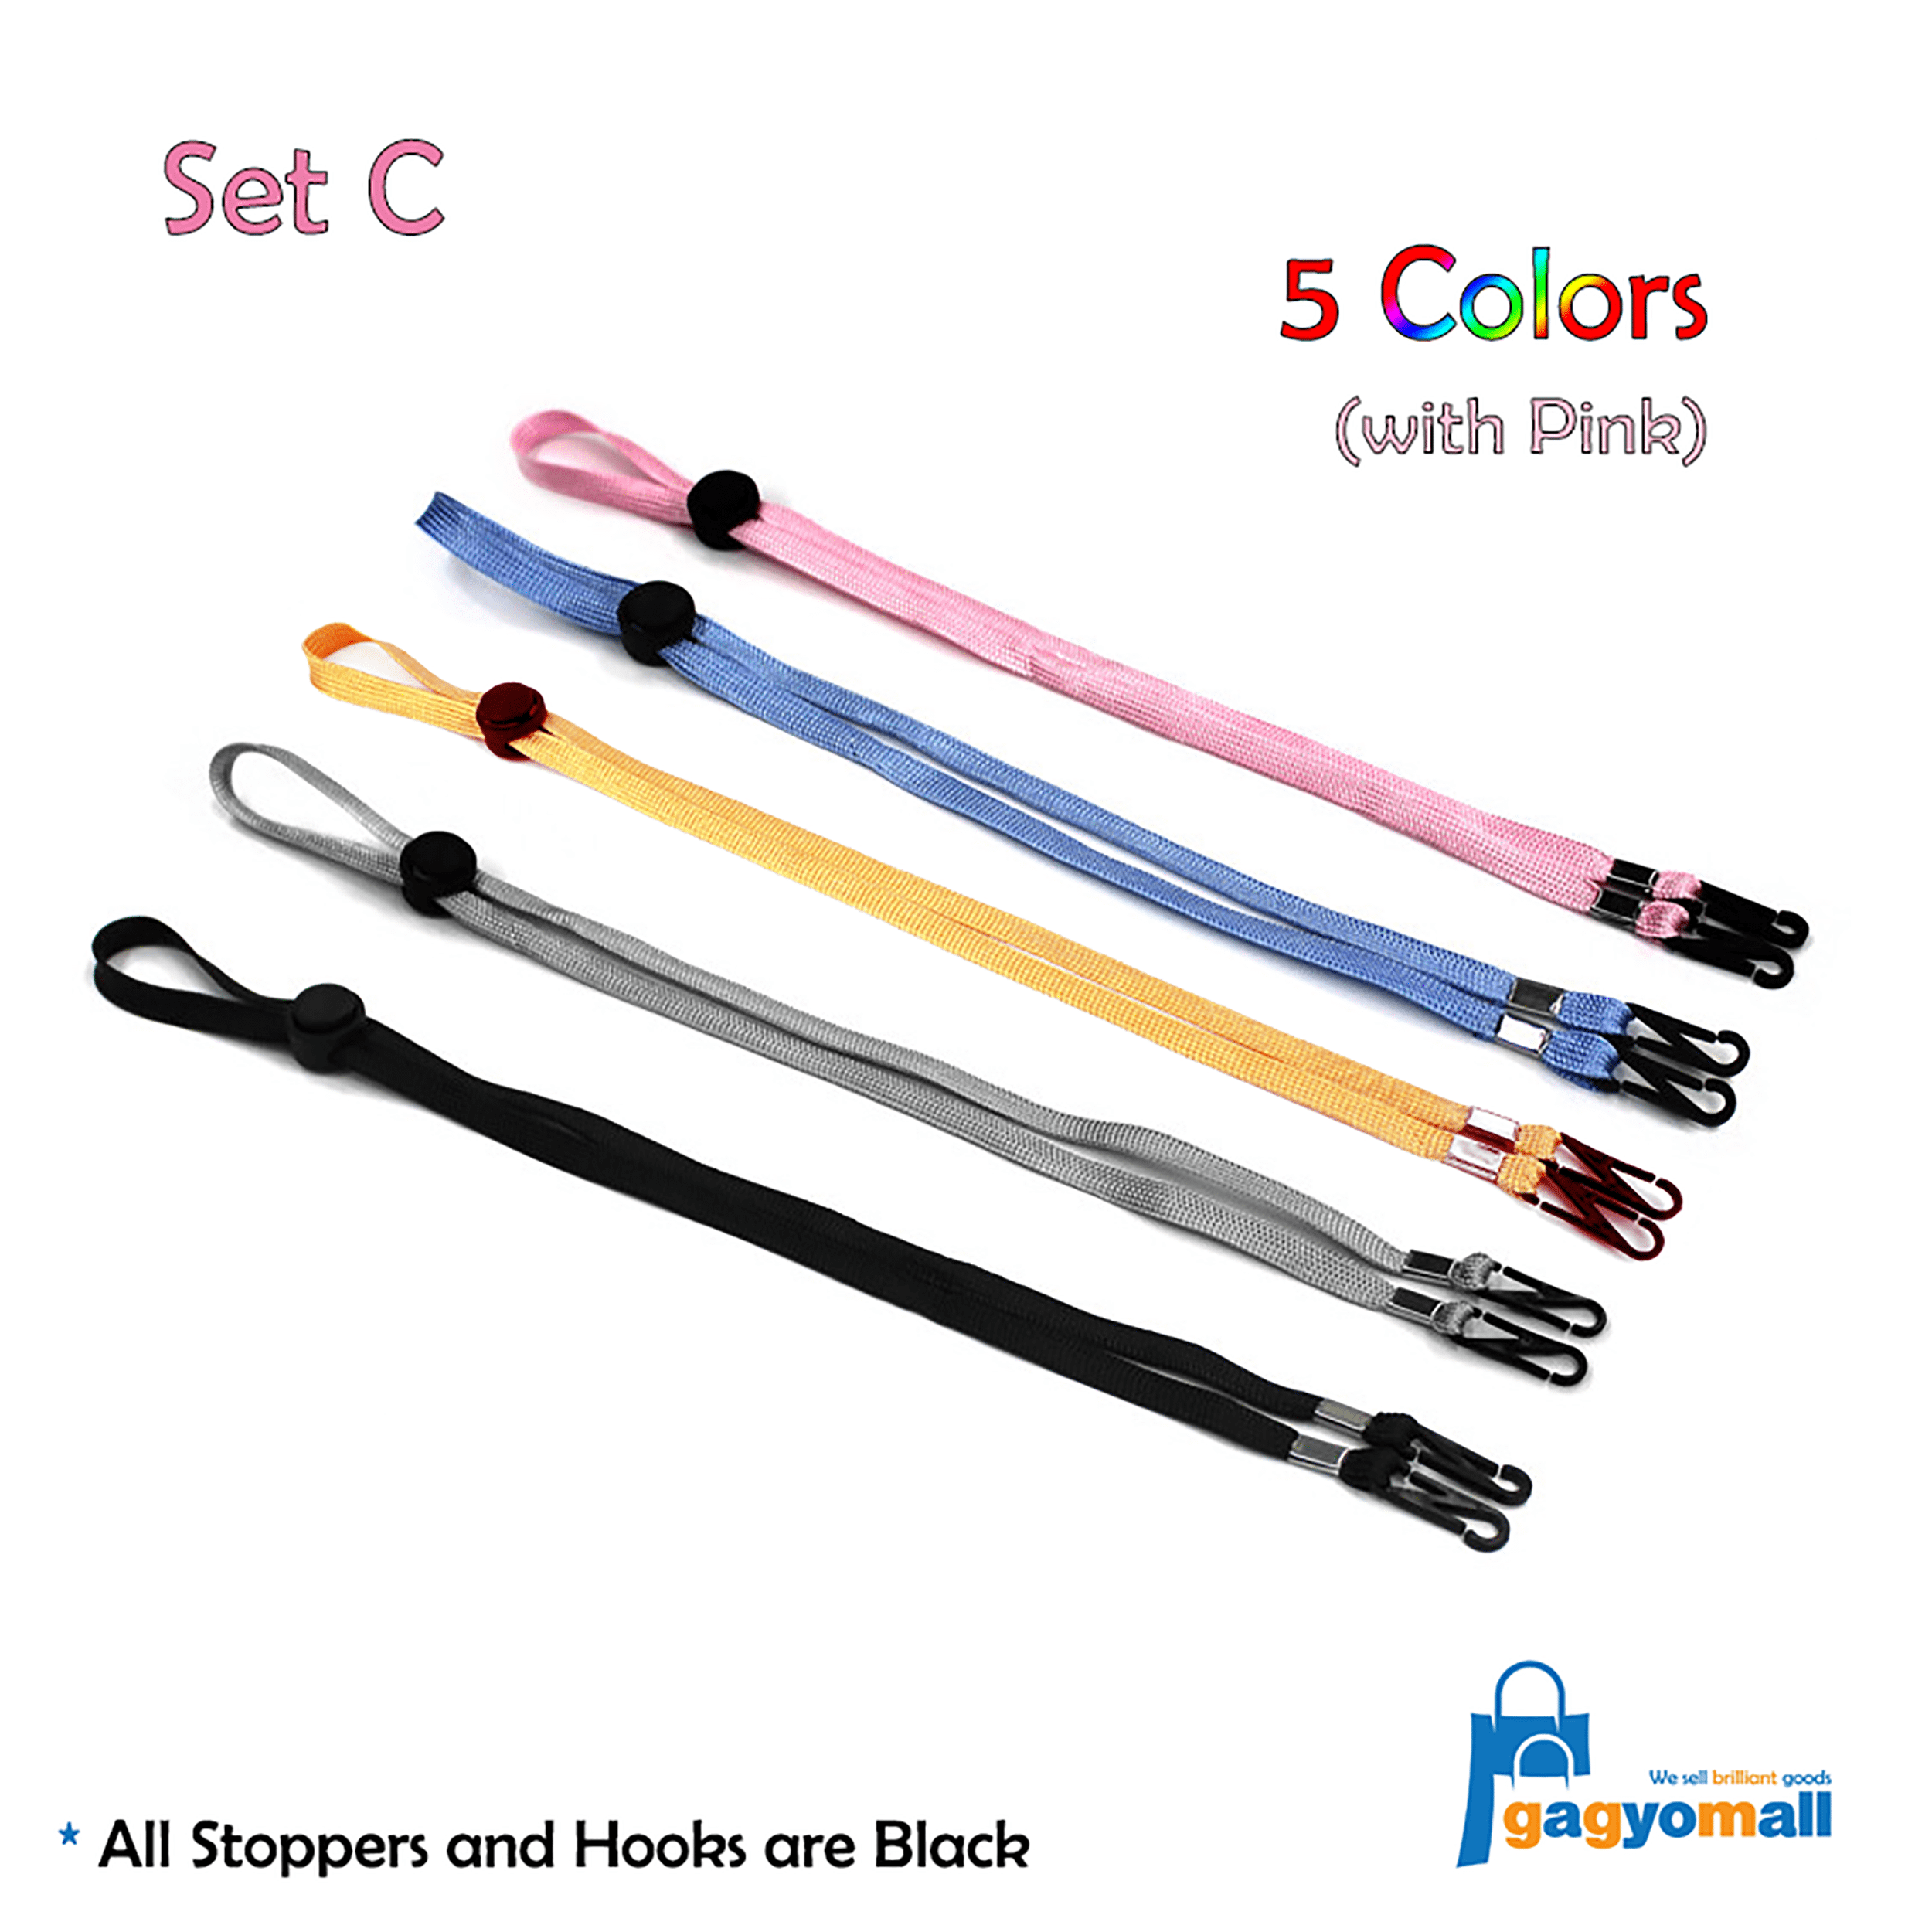 5Pcs Adjustable Length Mask Lanyard for Face Covering,Comfortable Neck Strap for Earloop Cord Safety Oral Covering,Chain Strap for Kids Adults School Outdoor Sport. Blue 